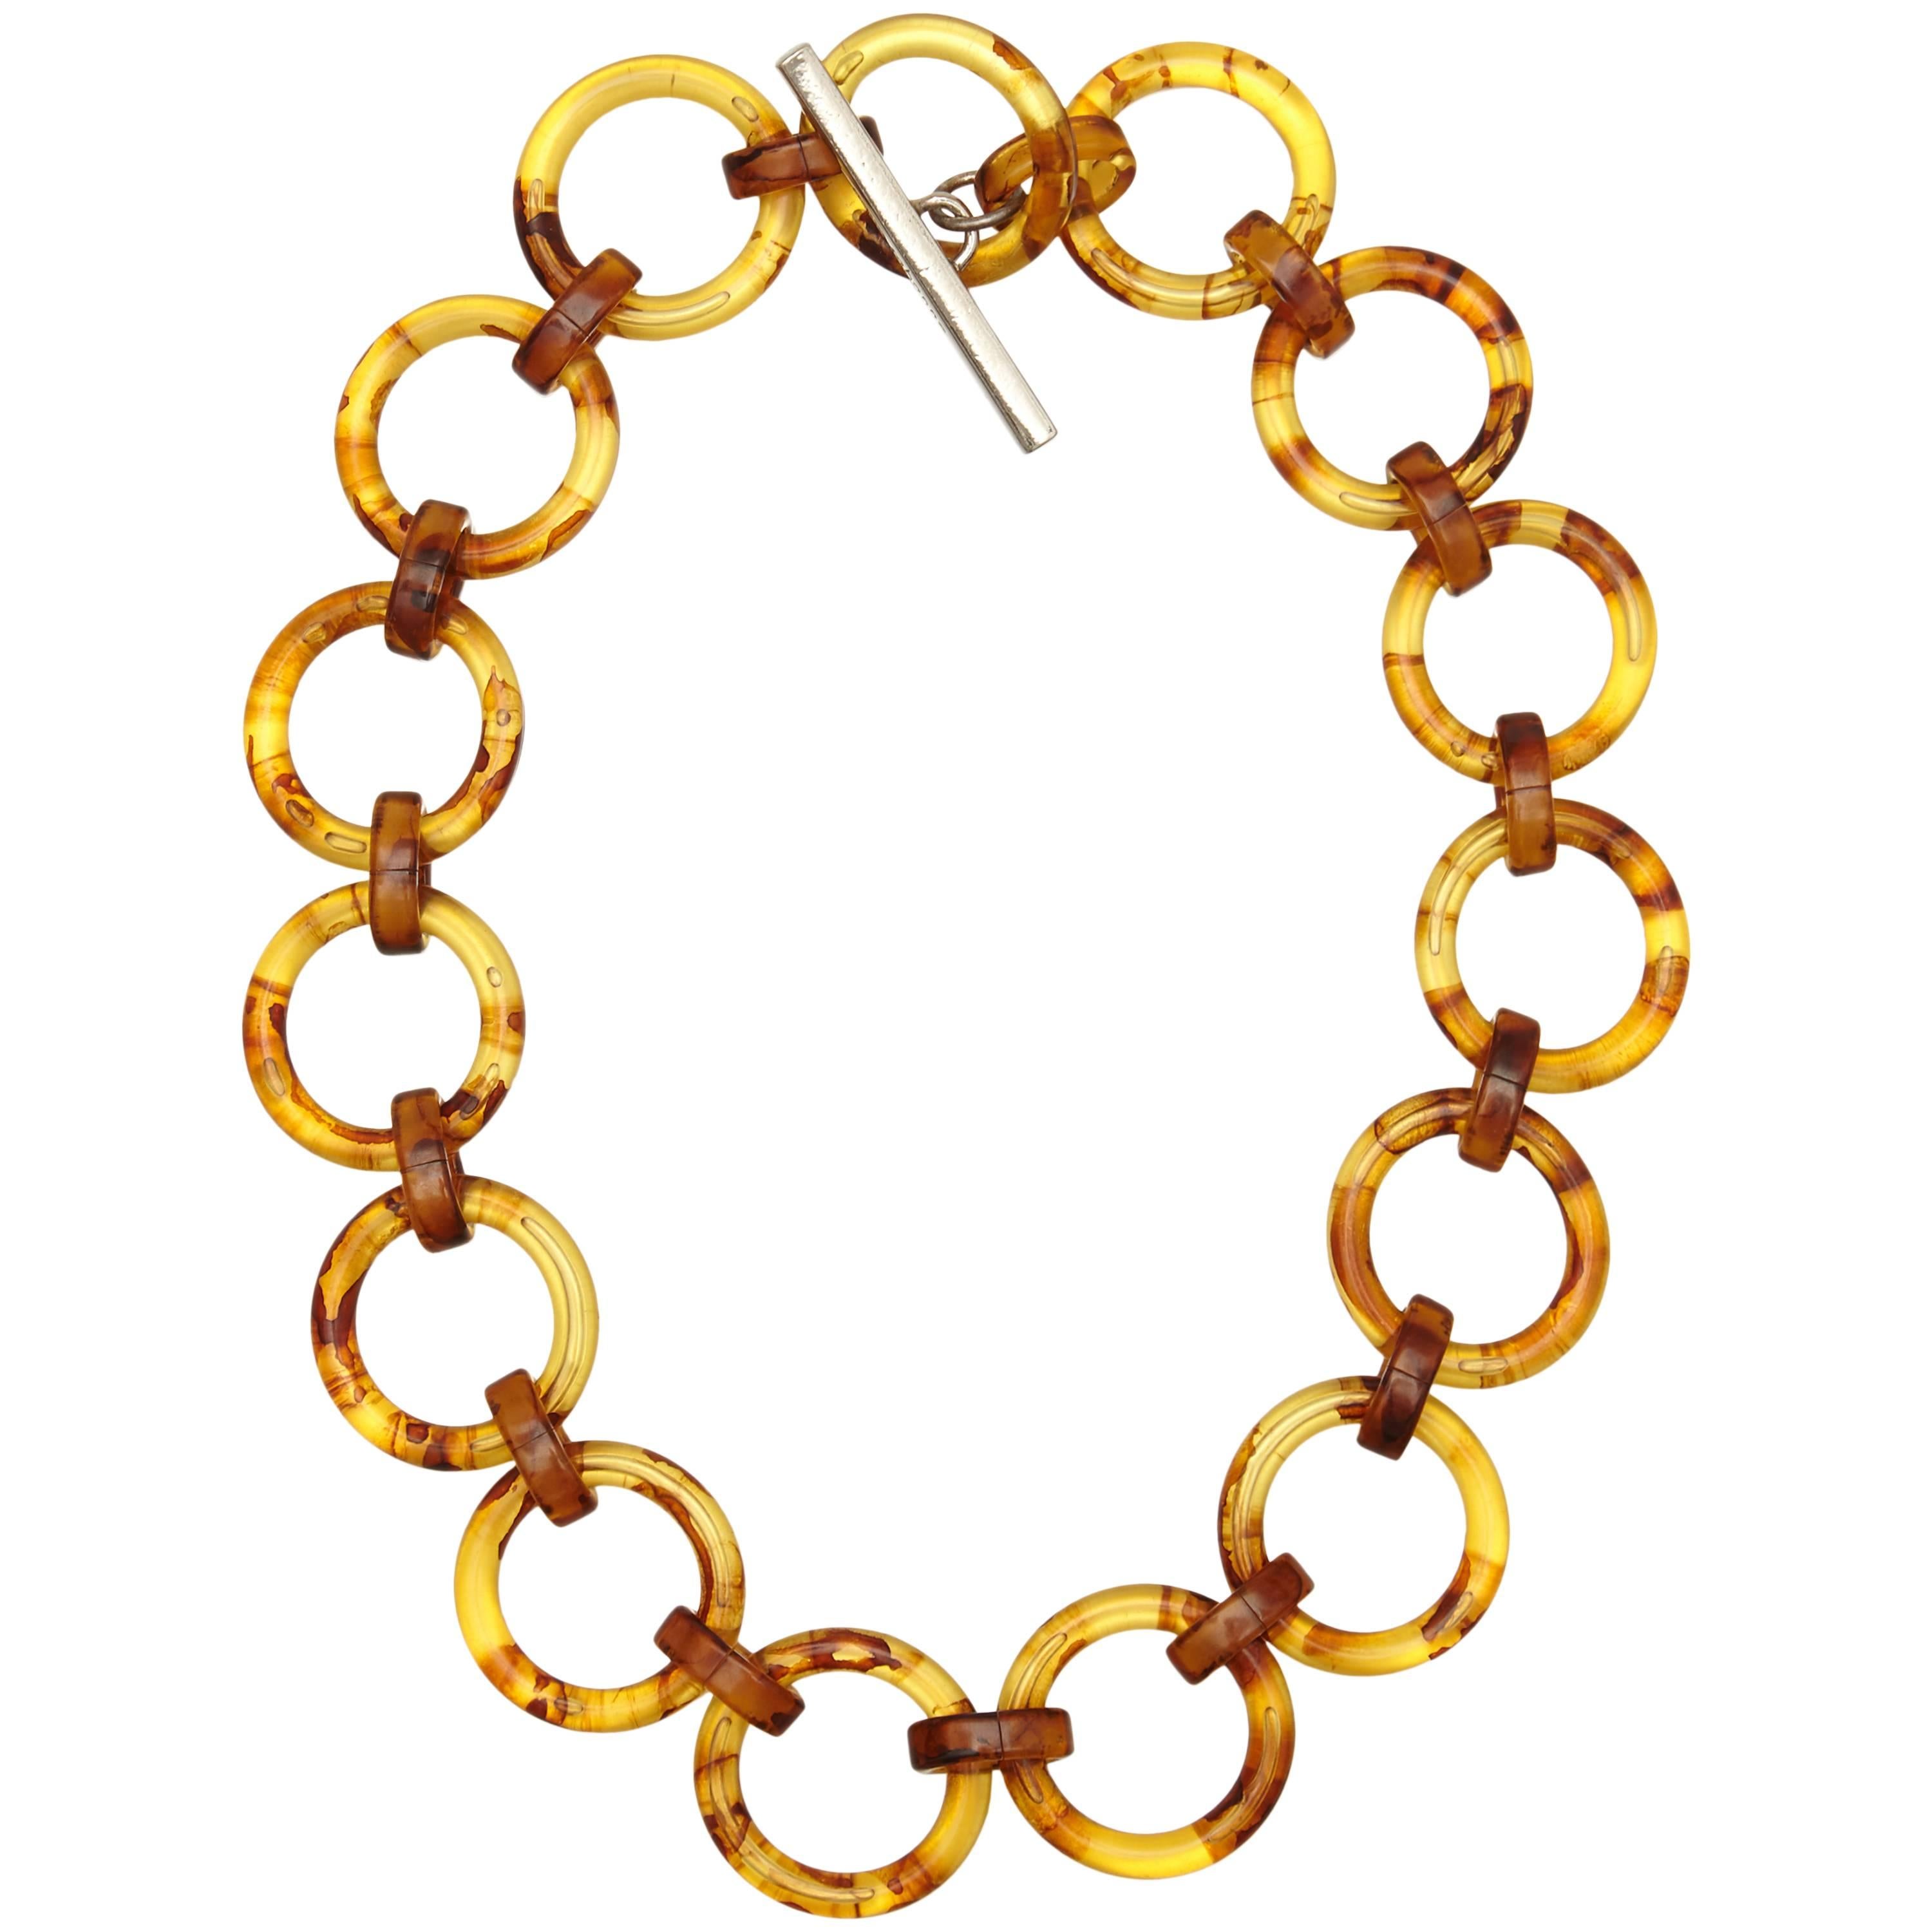  1980s Paco Rabanne Chain Necklace